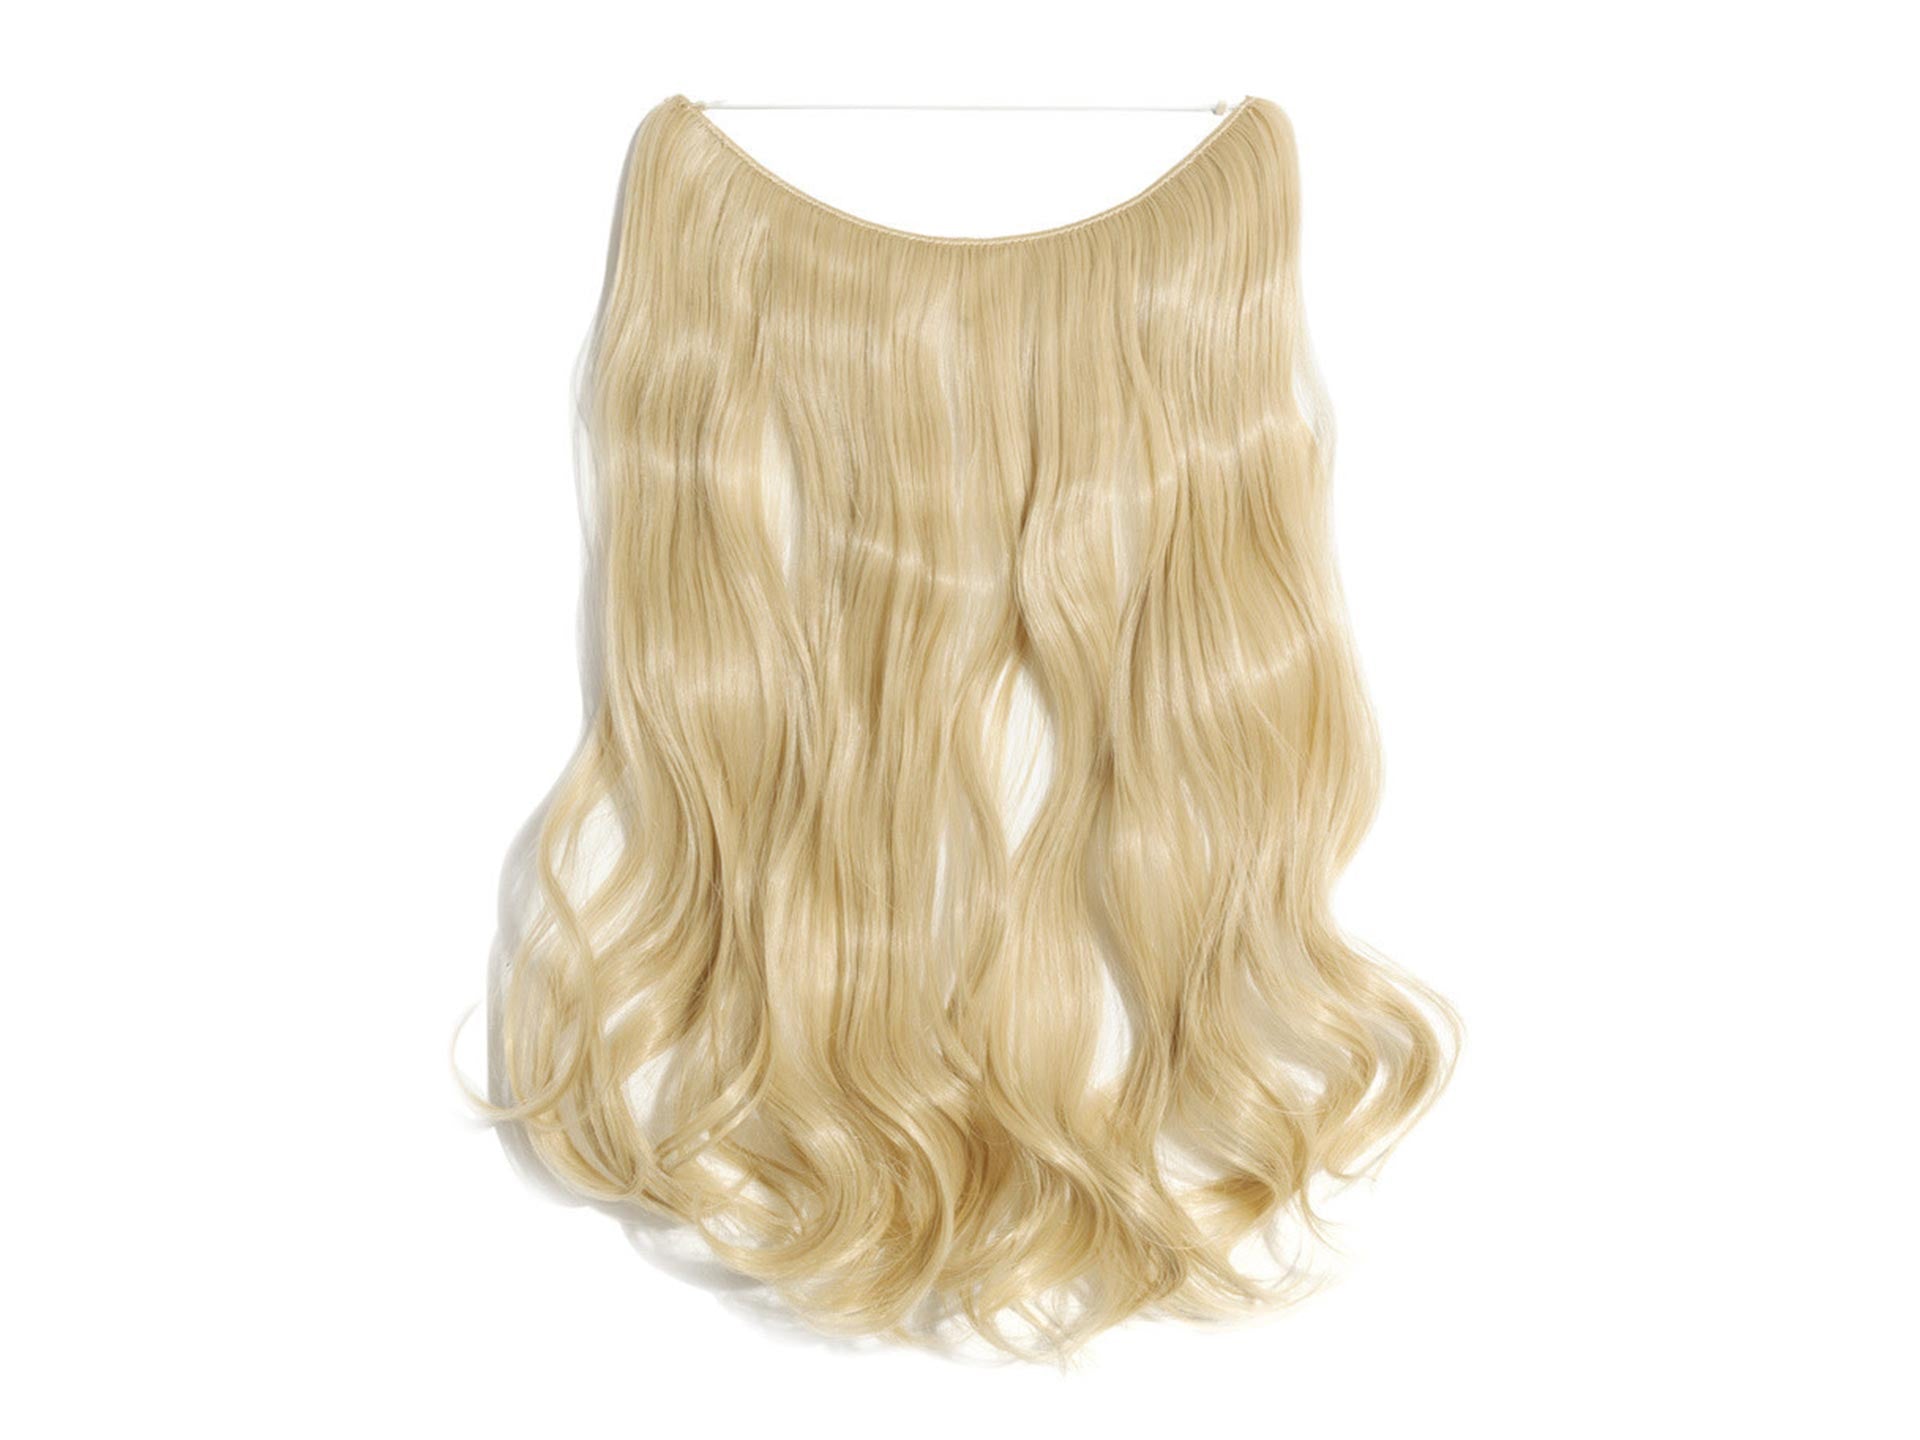 6. Halo Hair Extensions - wide 1